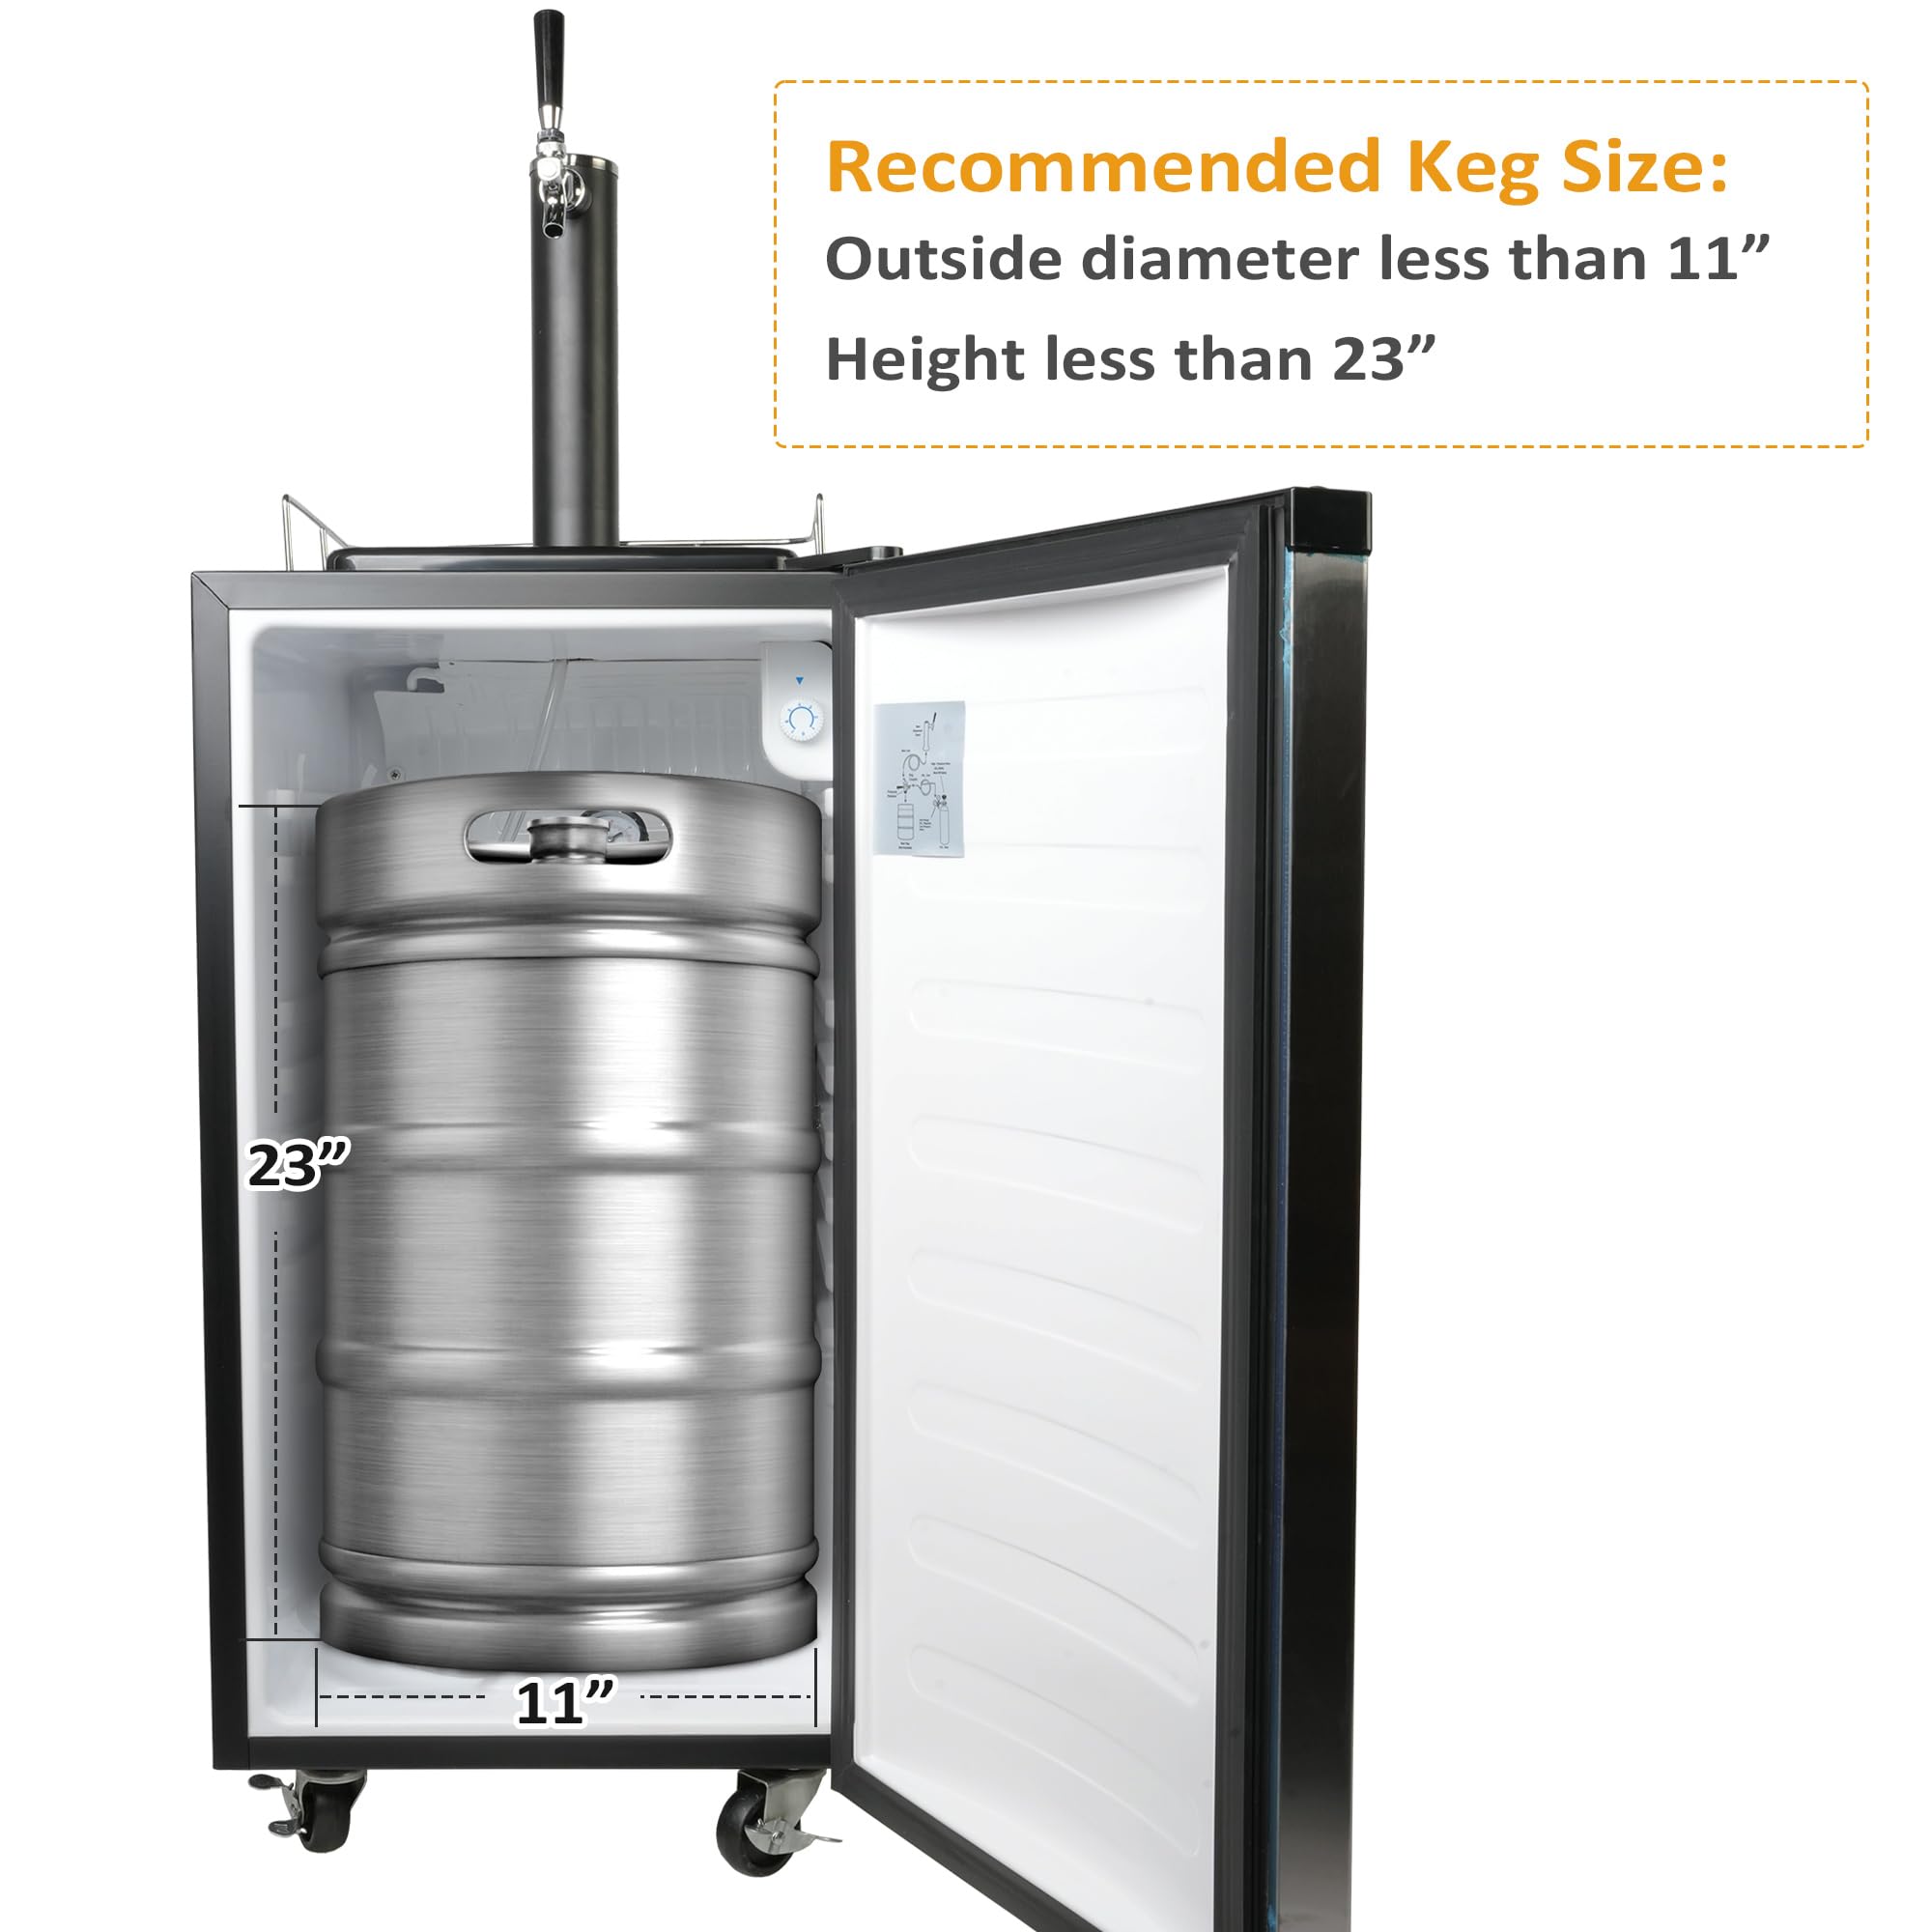 3.4 Cu.Ft. Kegerator, Keg Beer Cooler for Beer Dispensing with 4 Casters, CO2 Cylinder, Temperature Control, Drip Tray, Black Stainless Steel